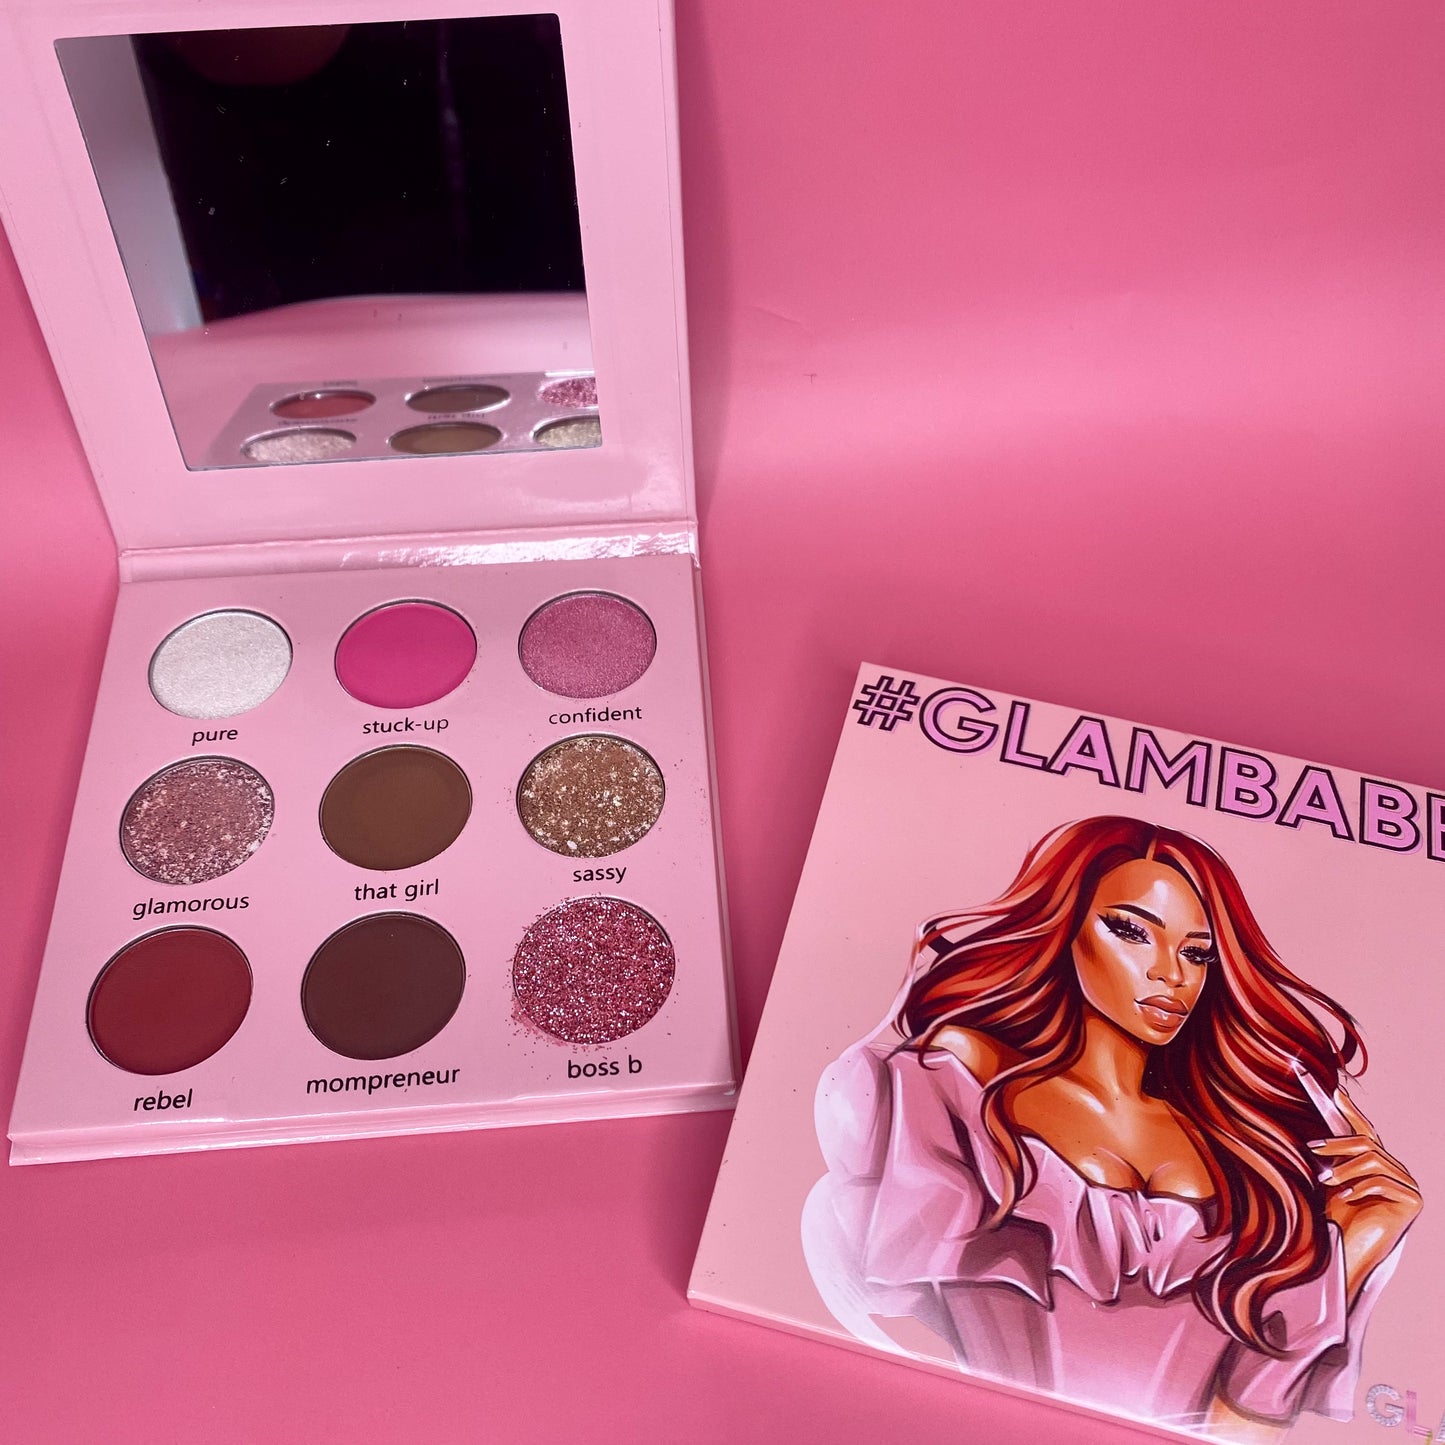 The "Confidence" Eyeshadow Palette - Glam by Kamrie